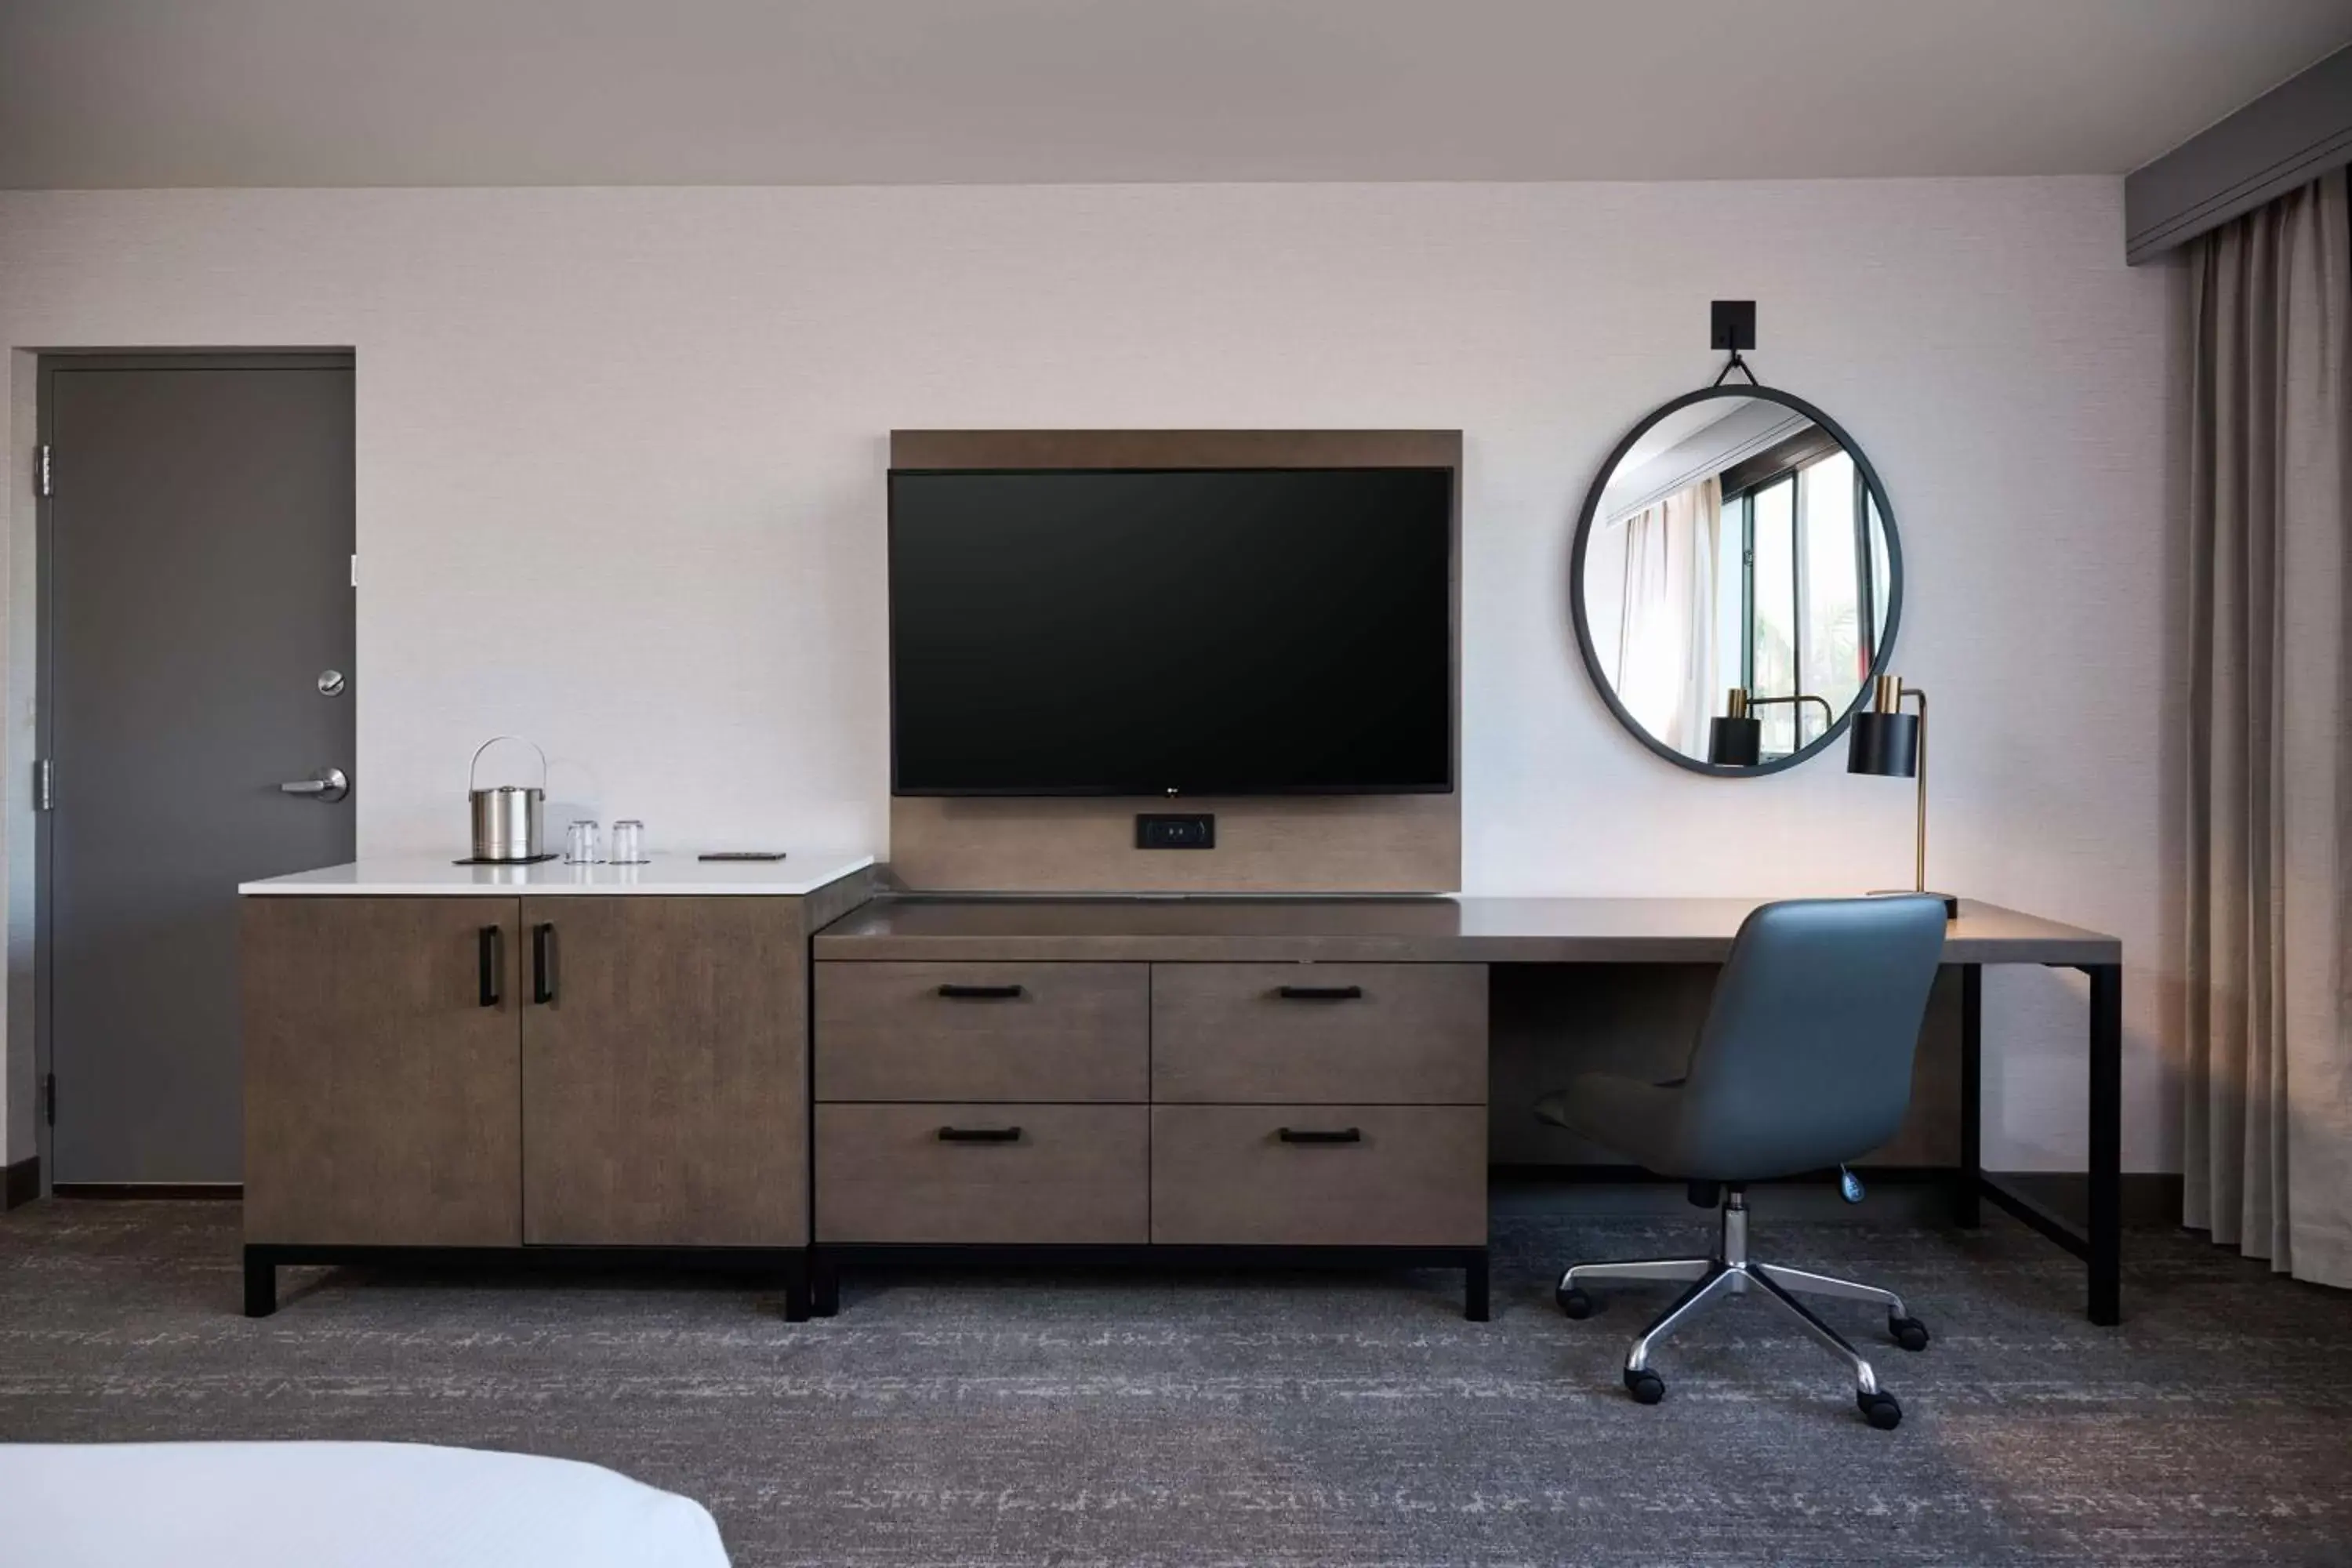 Bedroom, TV/Entertainment Center in Doubletree by Hilton Buena Park